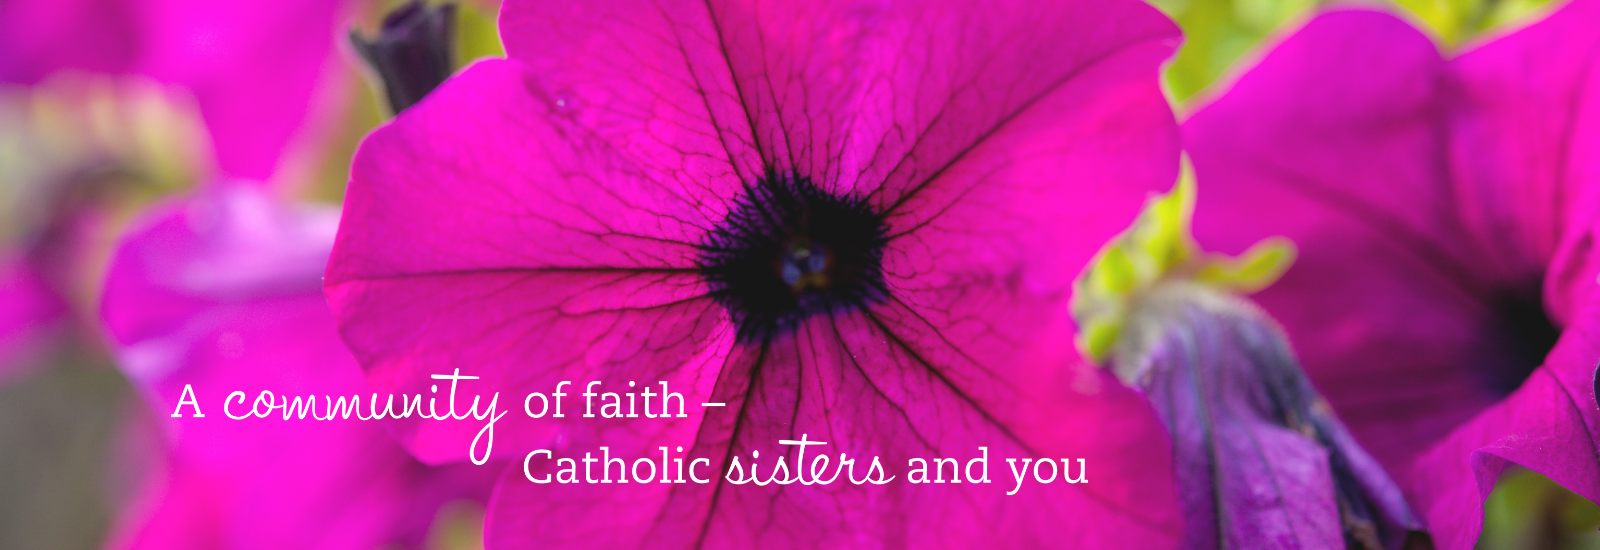 Catholic Sisters and You!